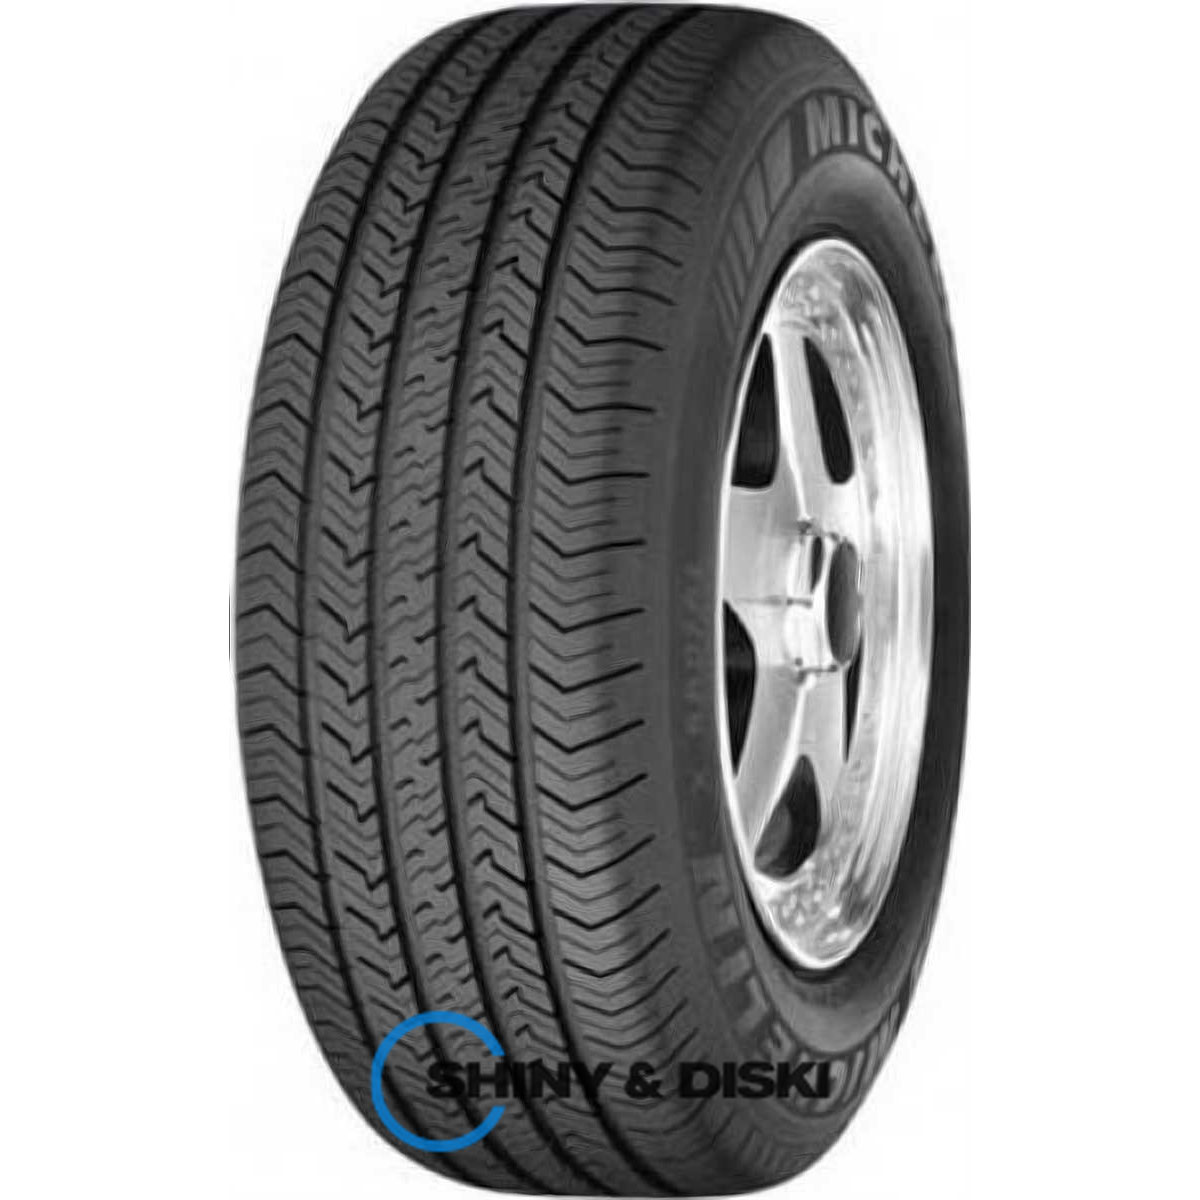 michelin x-radial dt 205/60 r16 91t